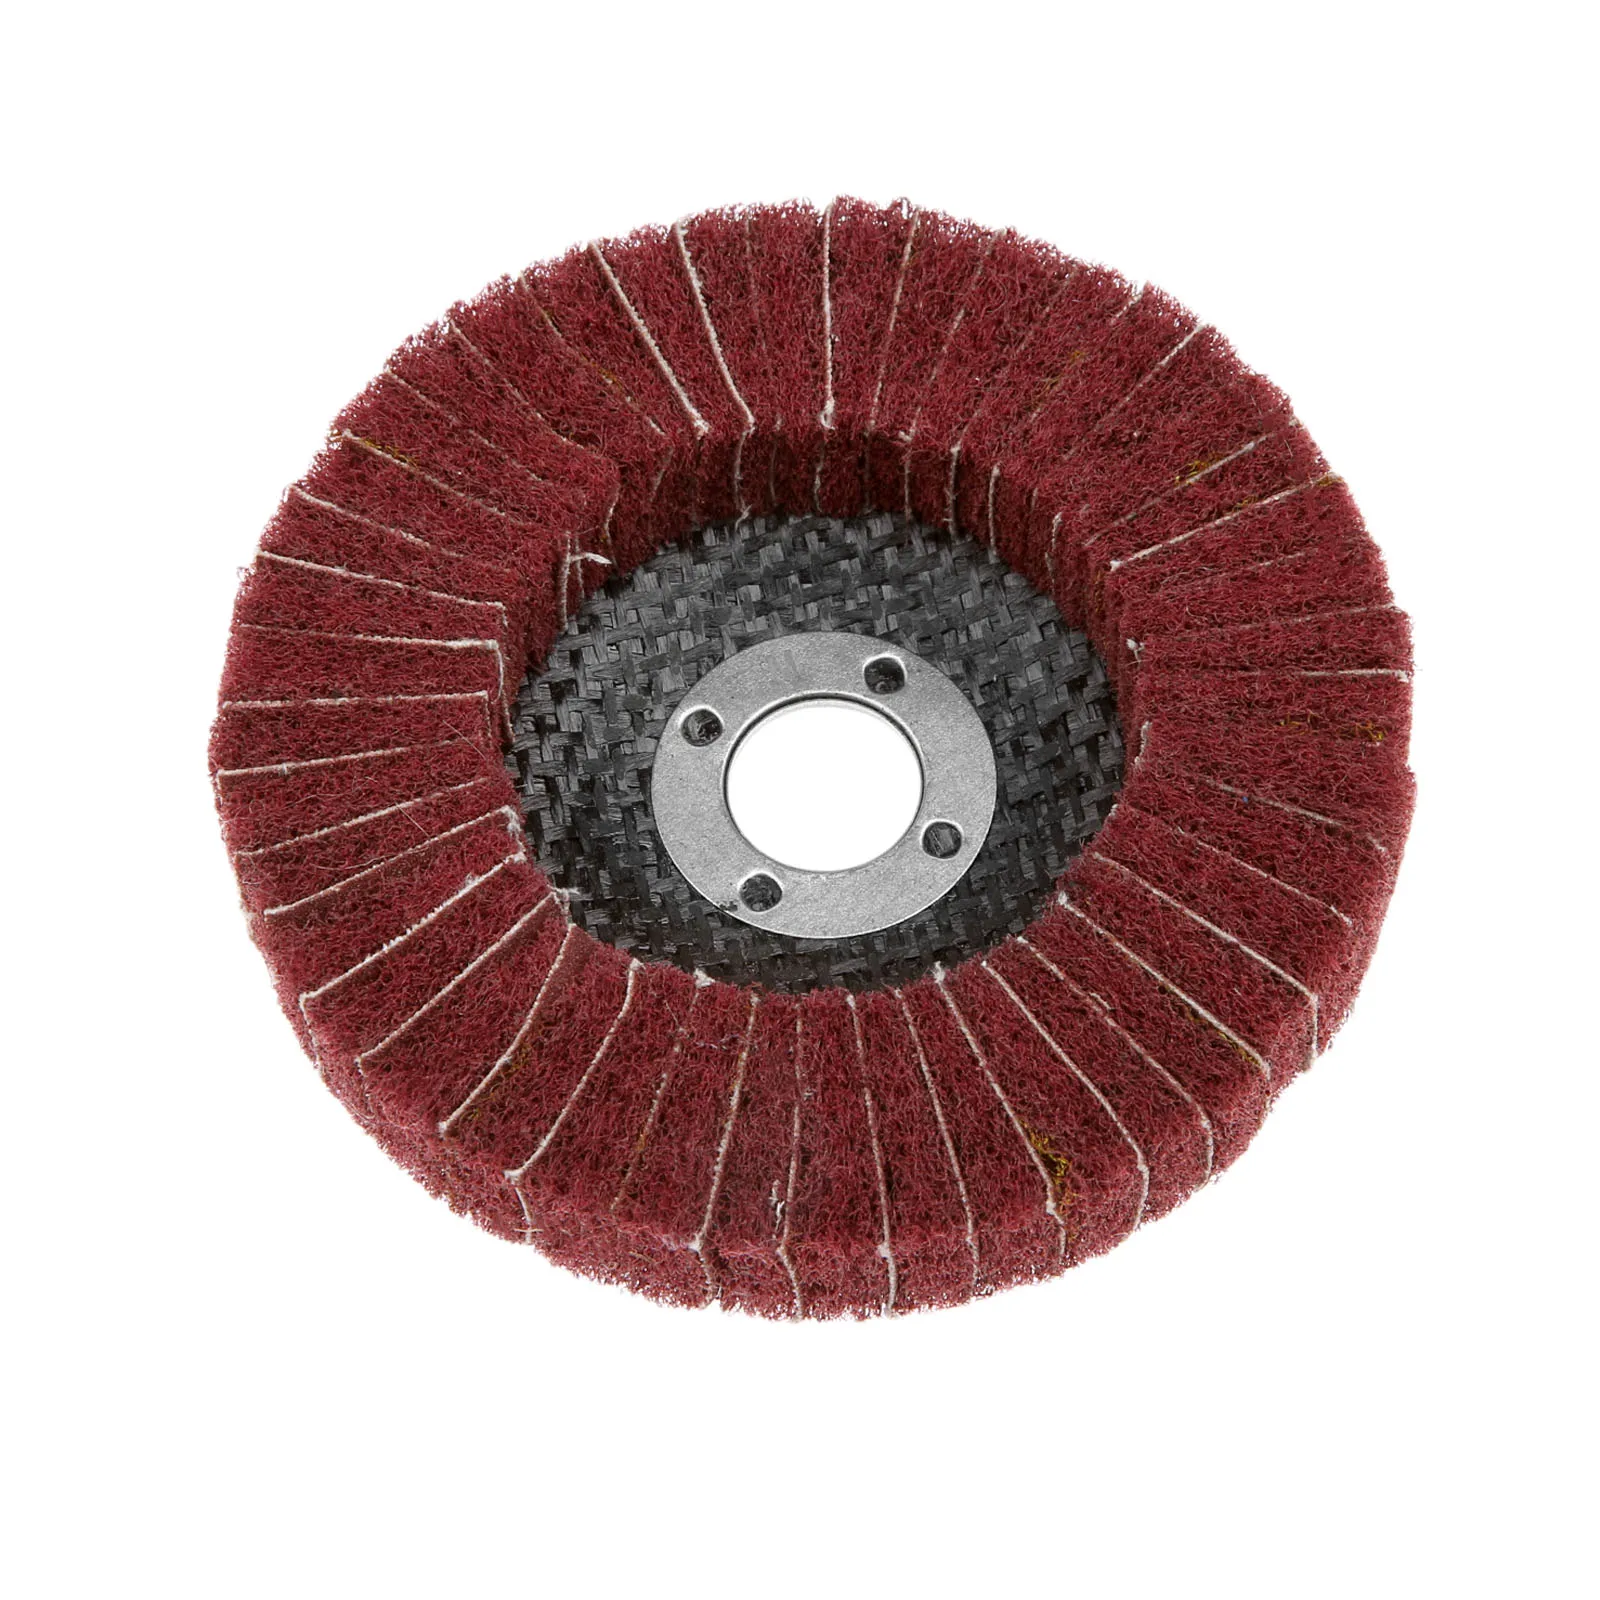 

1pc Red Nylon Fiber Flap Polishing Wheel Disc 100mm 320 Grit for Angle Grinder Wood Metal Buffing Tools